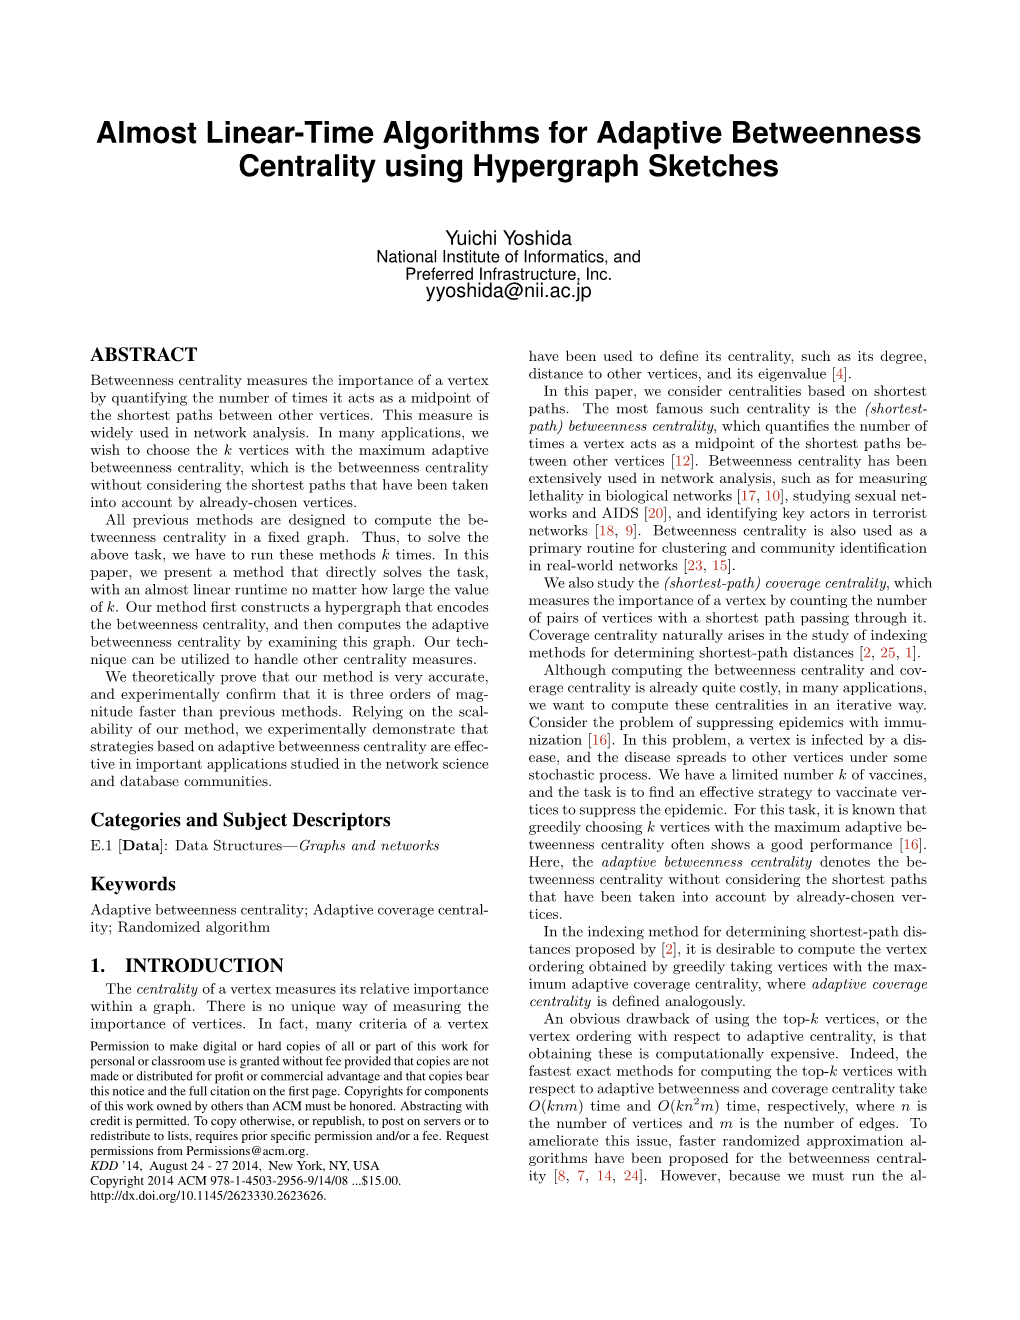 Almost Linear-Time Algorithms for Adaptive Betweenness Centrality Using Hypergraph Sketches